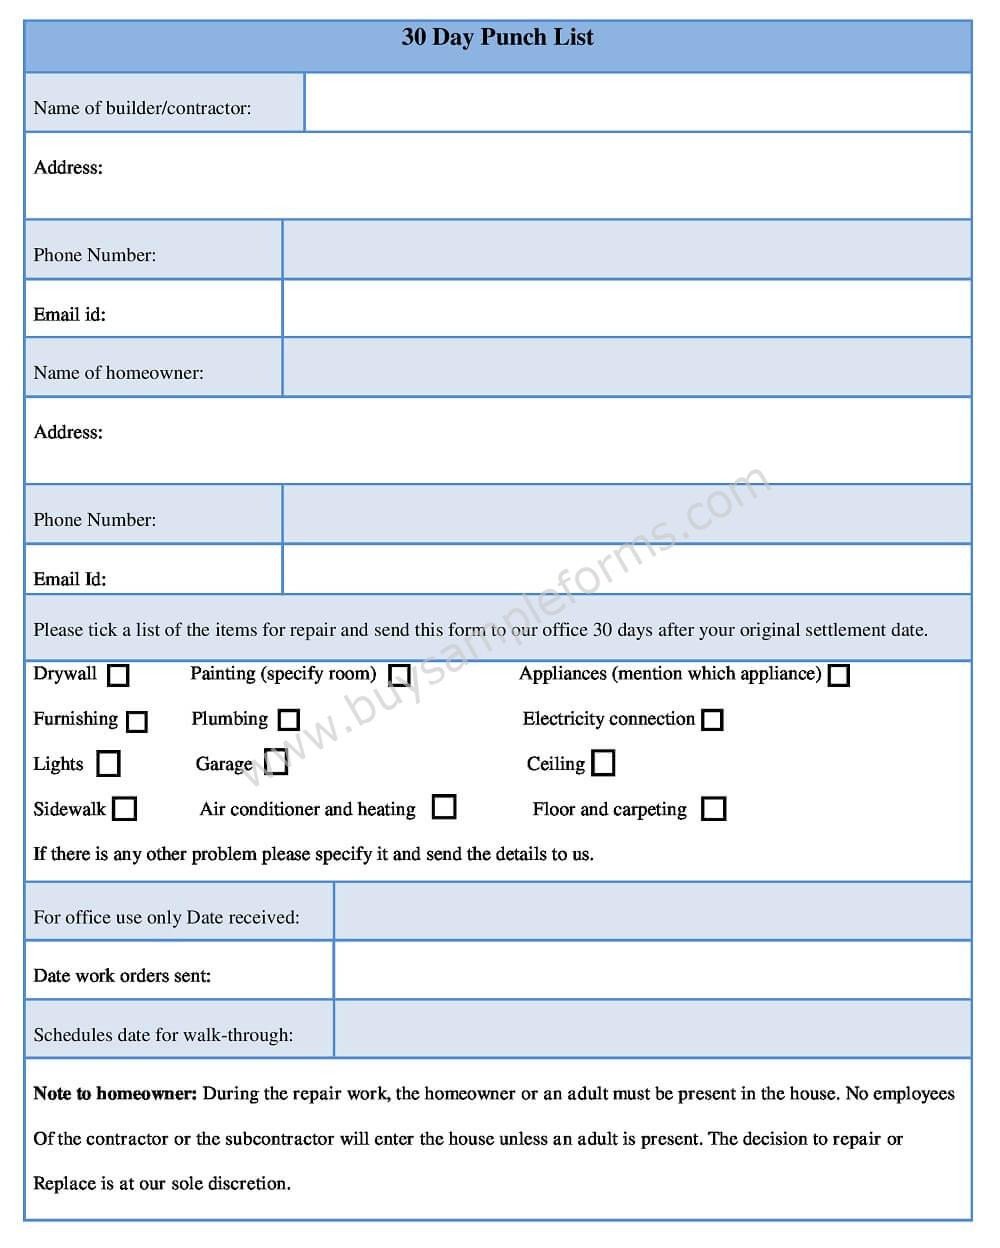 Apartment Punch List Template Download 30 Day Punch List form In Word